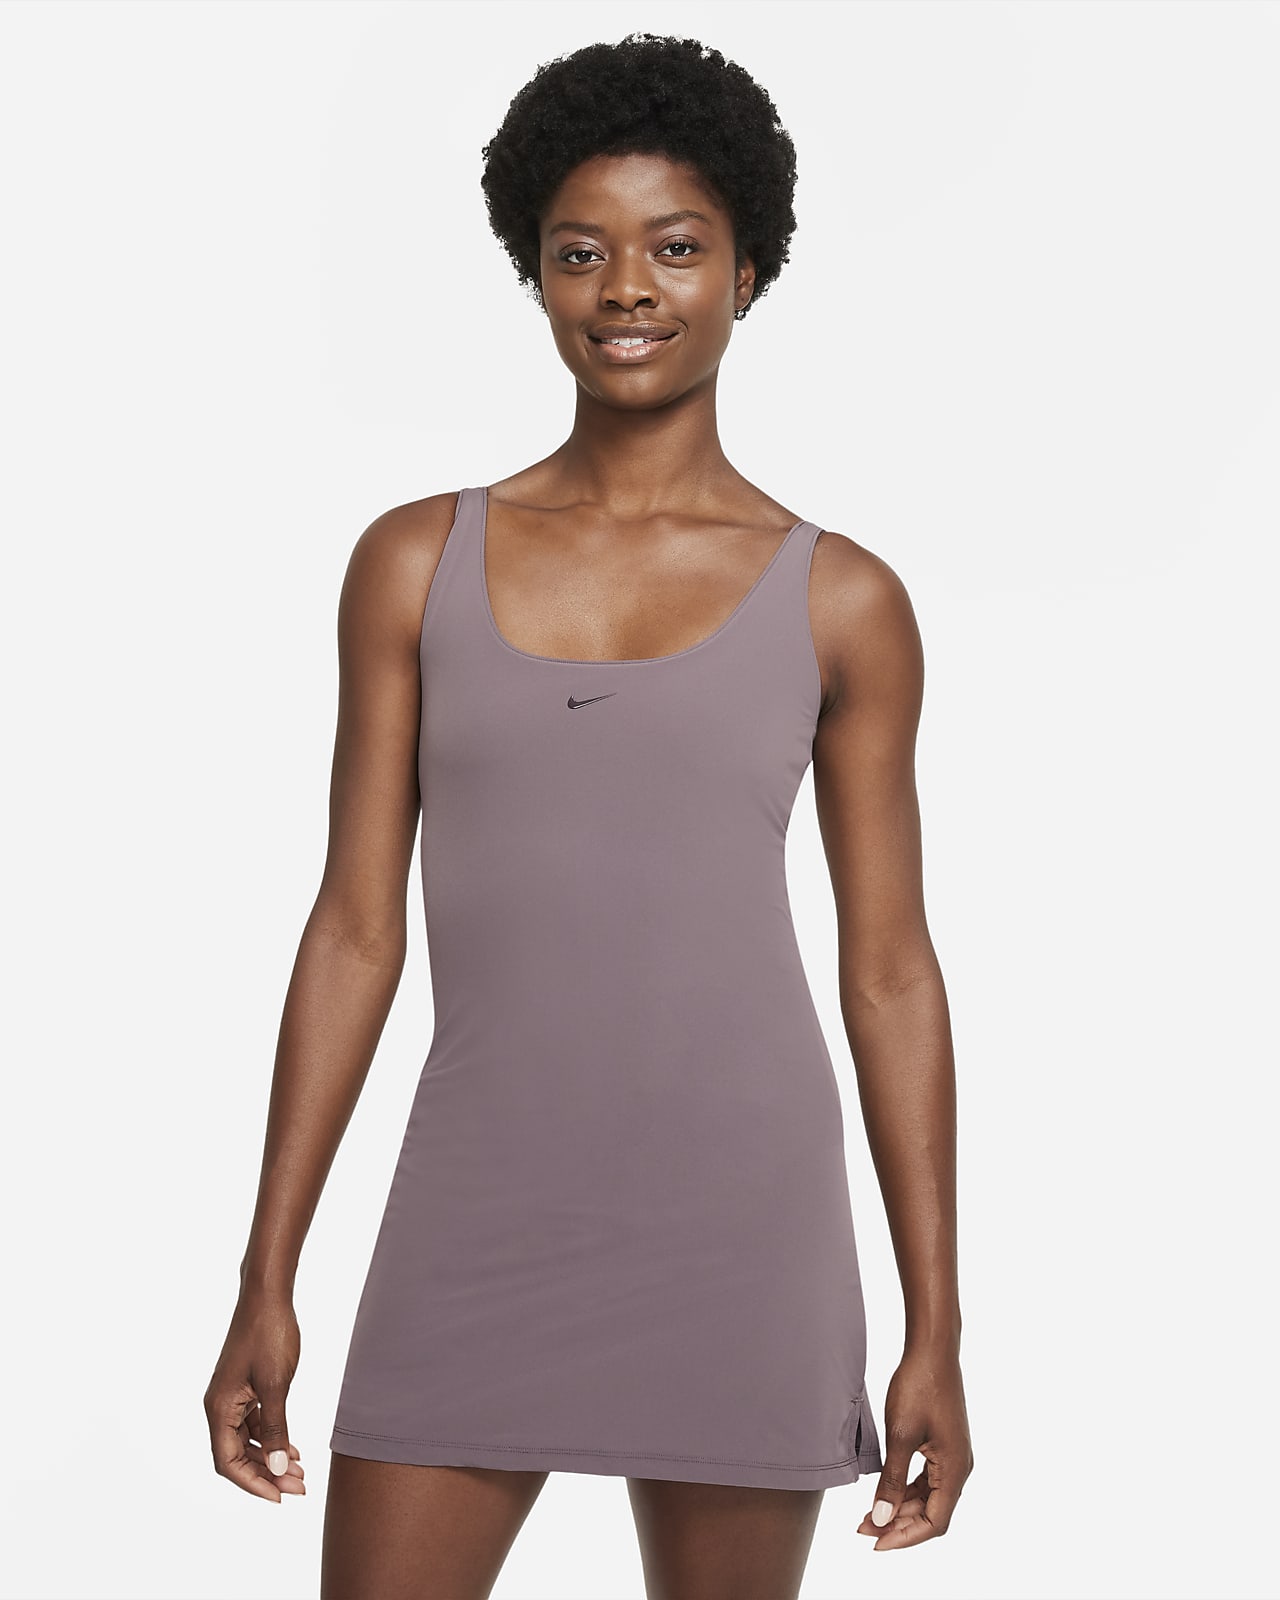 Nike Bliss Luxe Women's Training Dress with Built-In Shorts